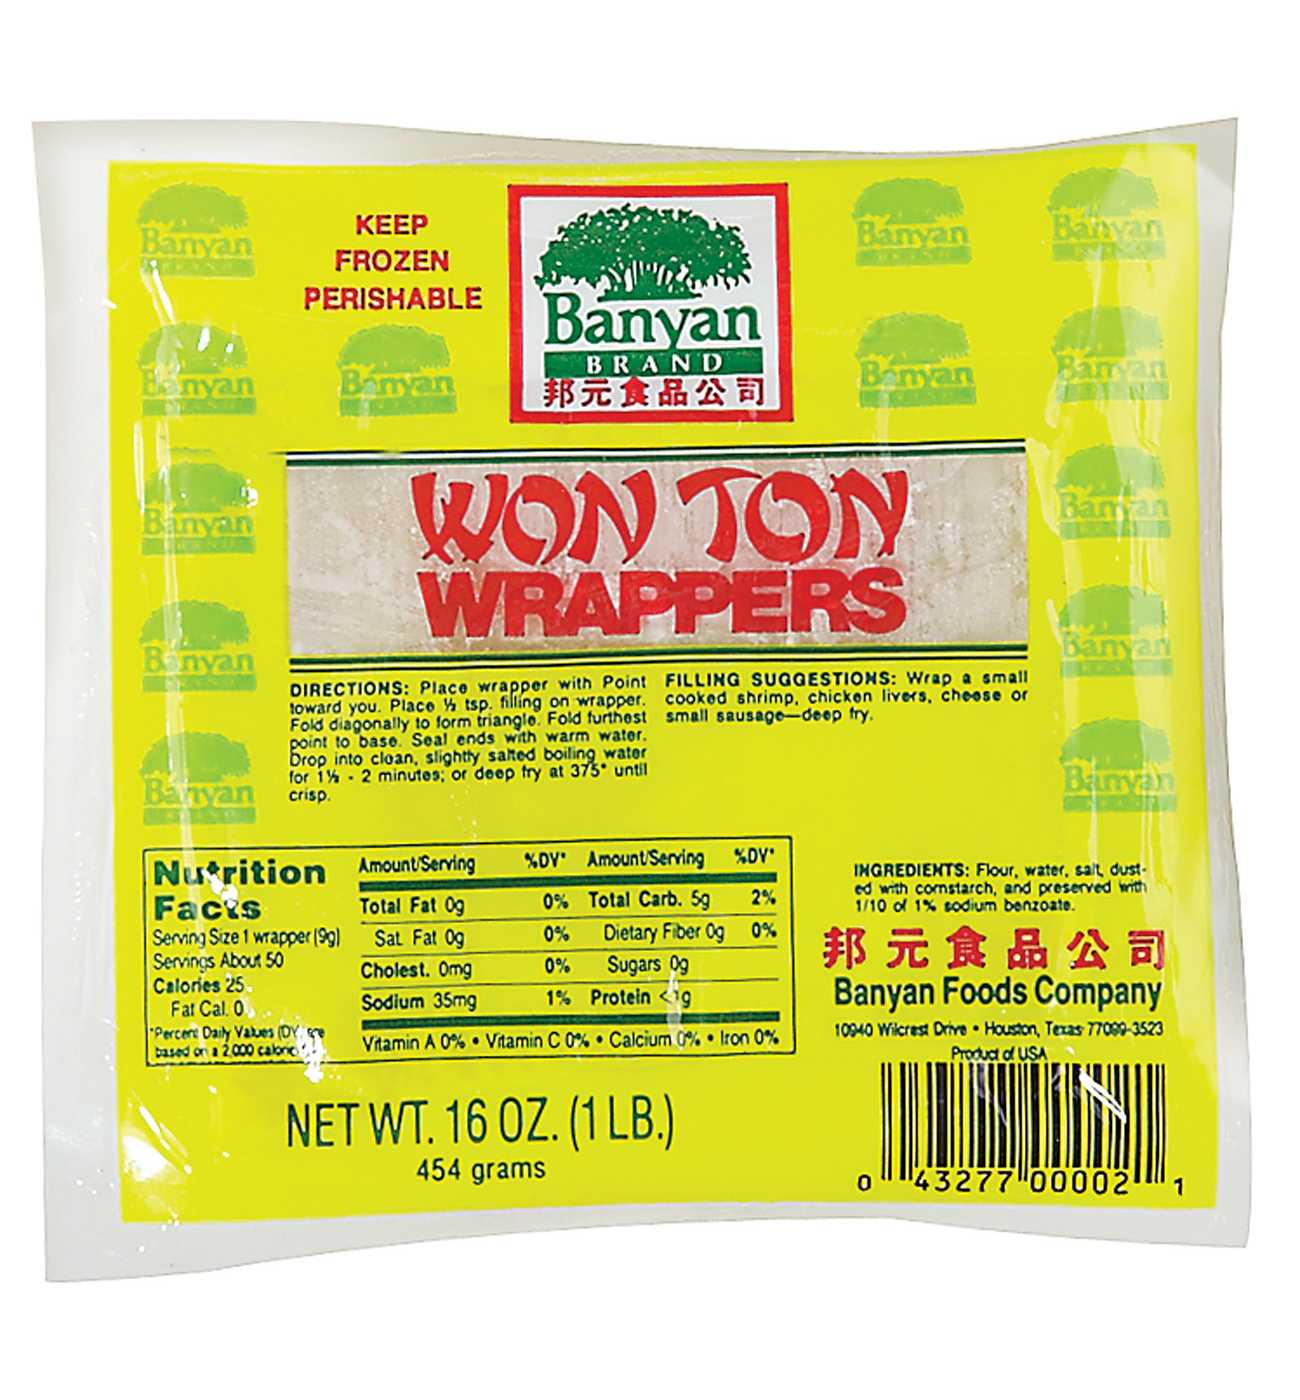 Banyan Foods Frozen Won Ton Wrappers; image 1 of 2